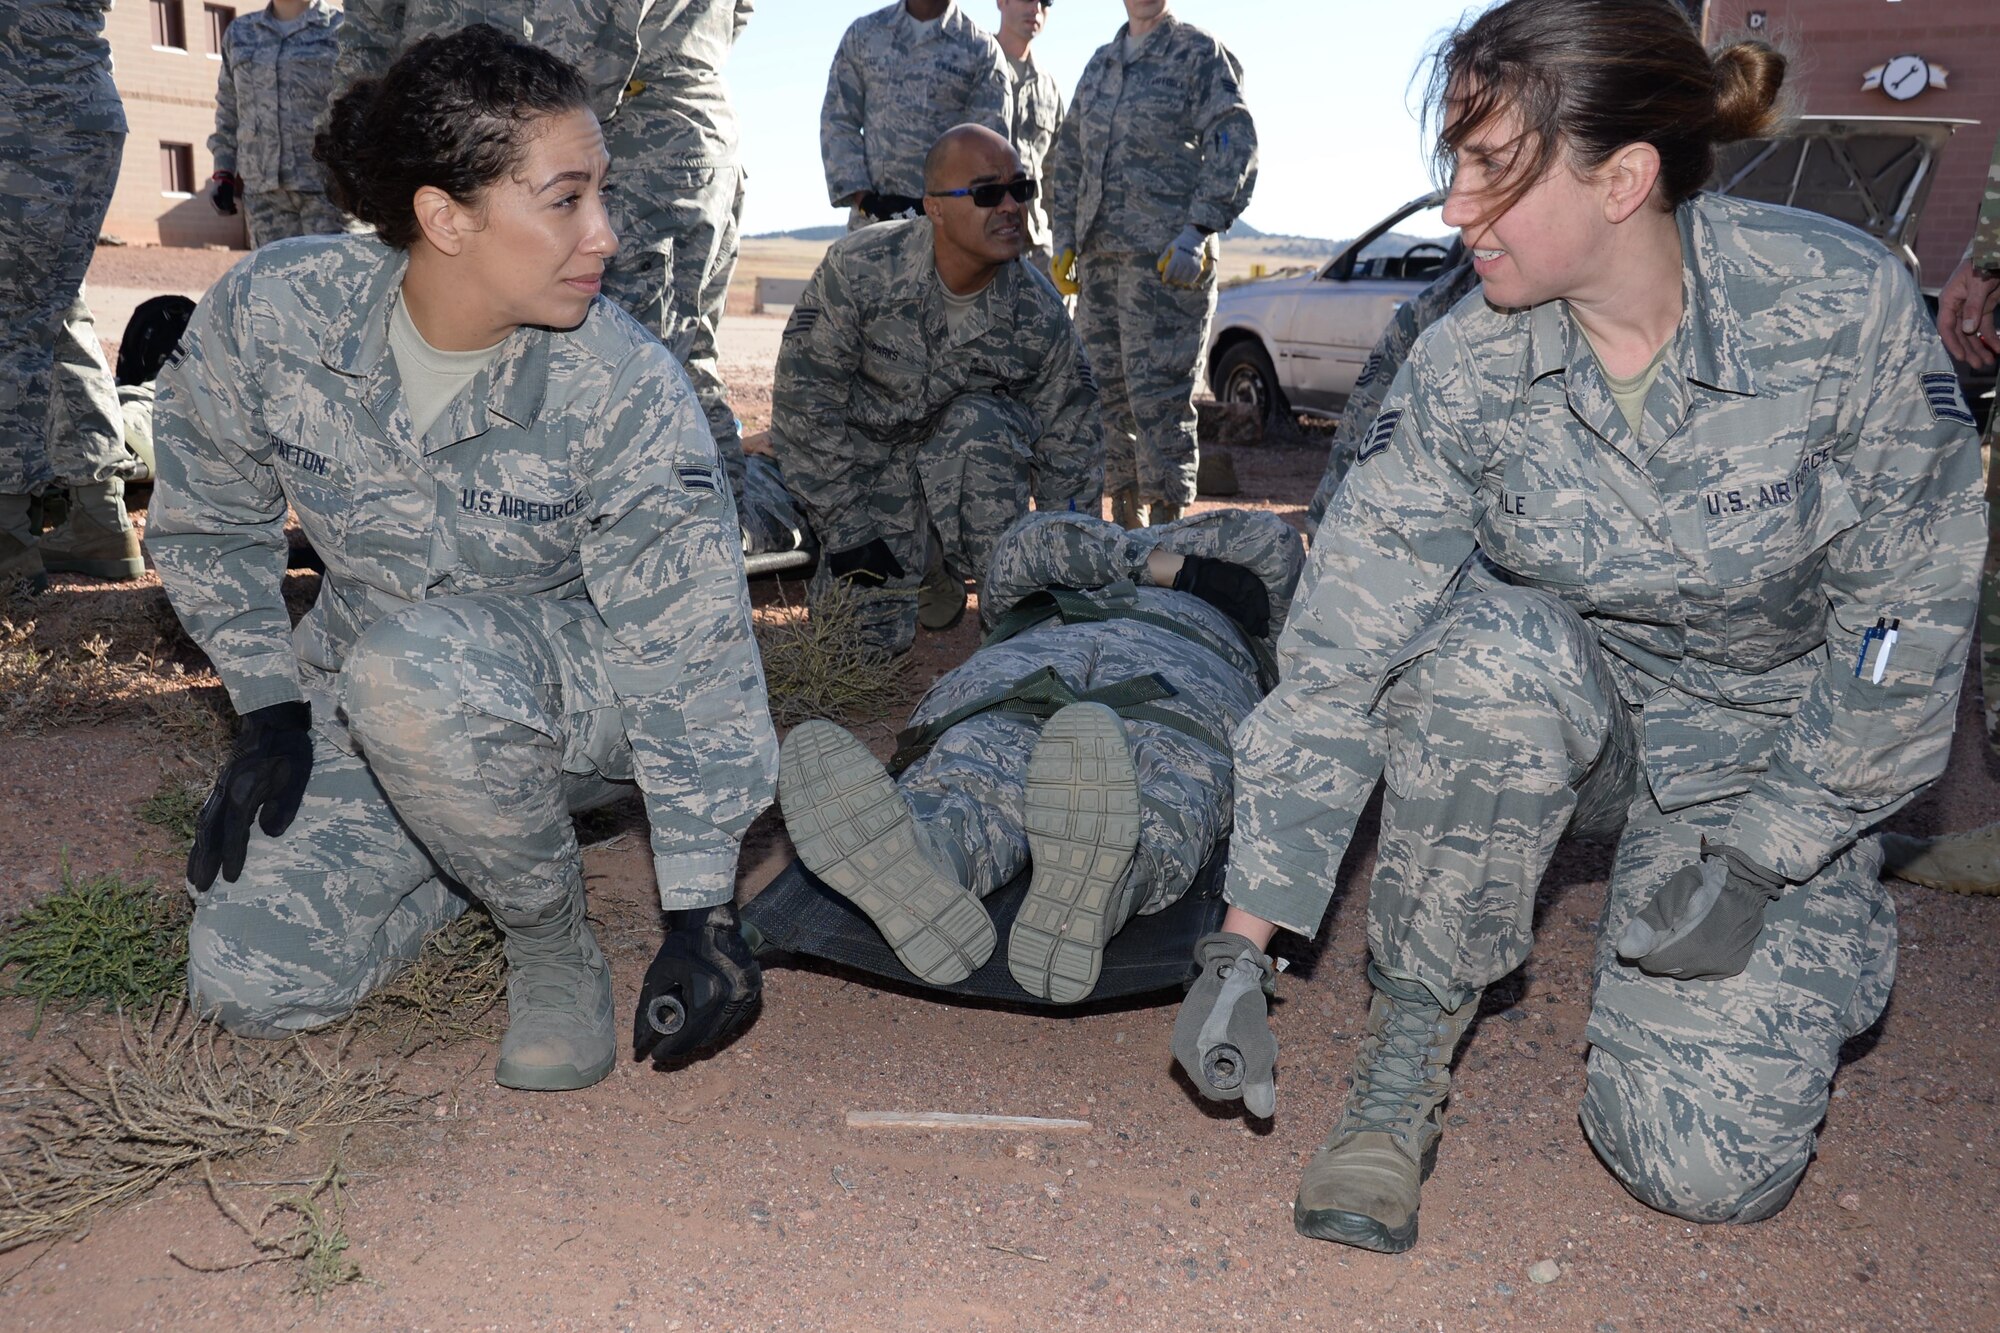 Staff Sgt. Barbara Yale and Airman 1st Class is Genevieve Patton, both 302nd Aeromedical Staging Squadron medical technicians, prepare to lift an Airman strapped to a litter during a joint aeromedical  exercise at Fort Carson’s Camp Red Devil training area in Colorado Springs, Colo., Oct. 14, 2017.